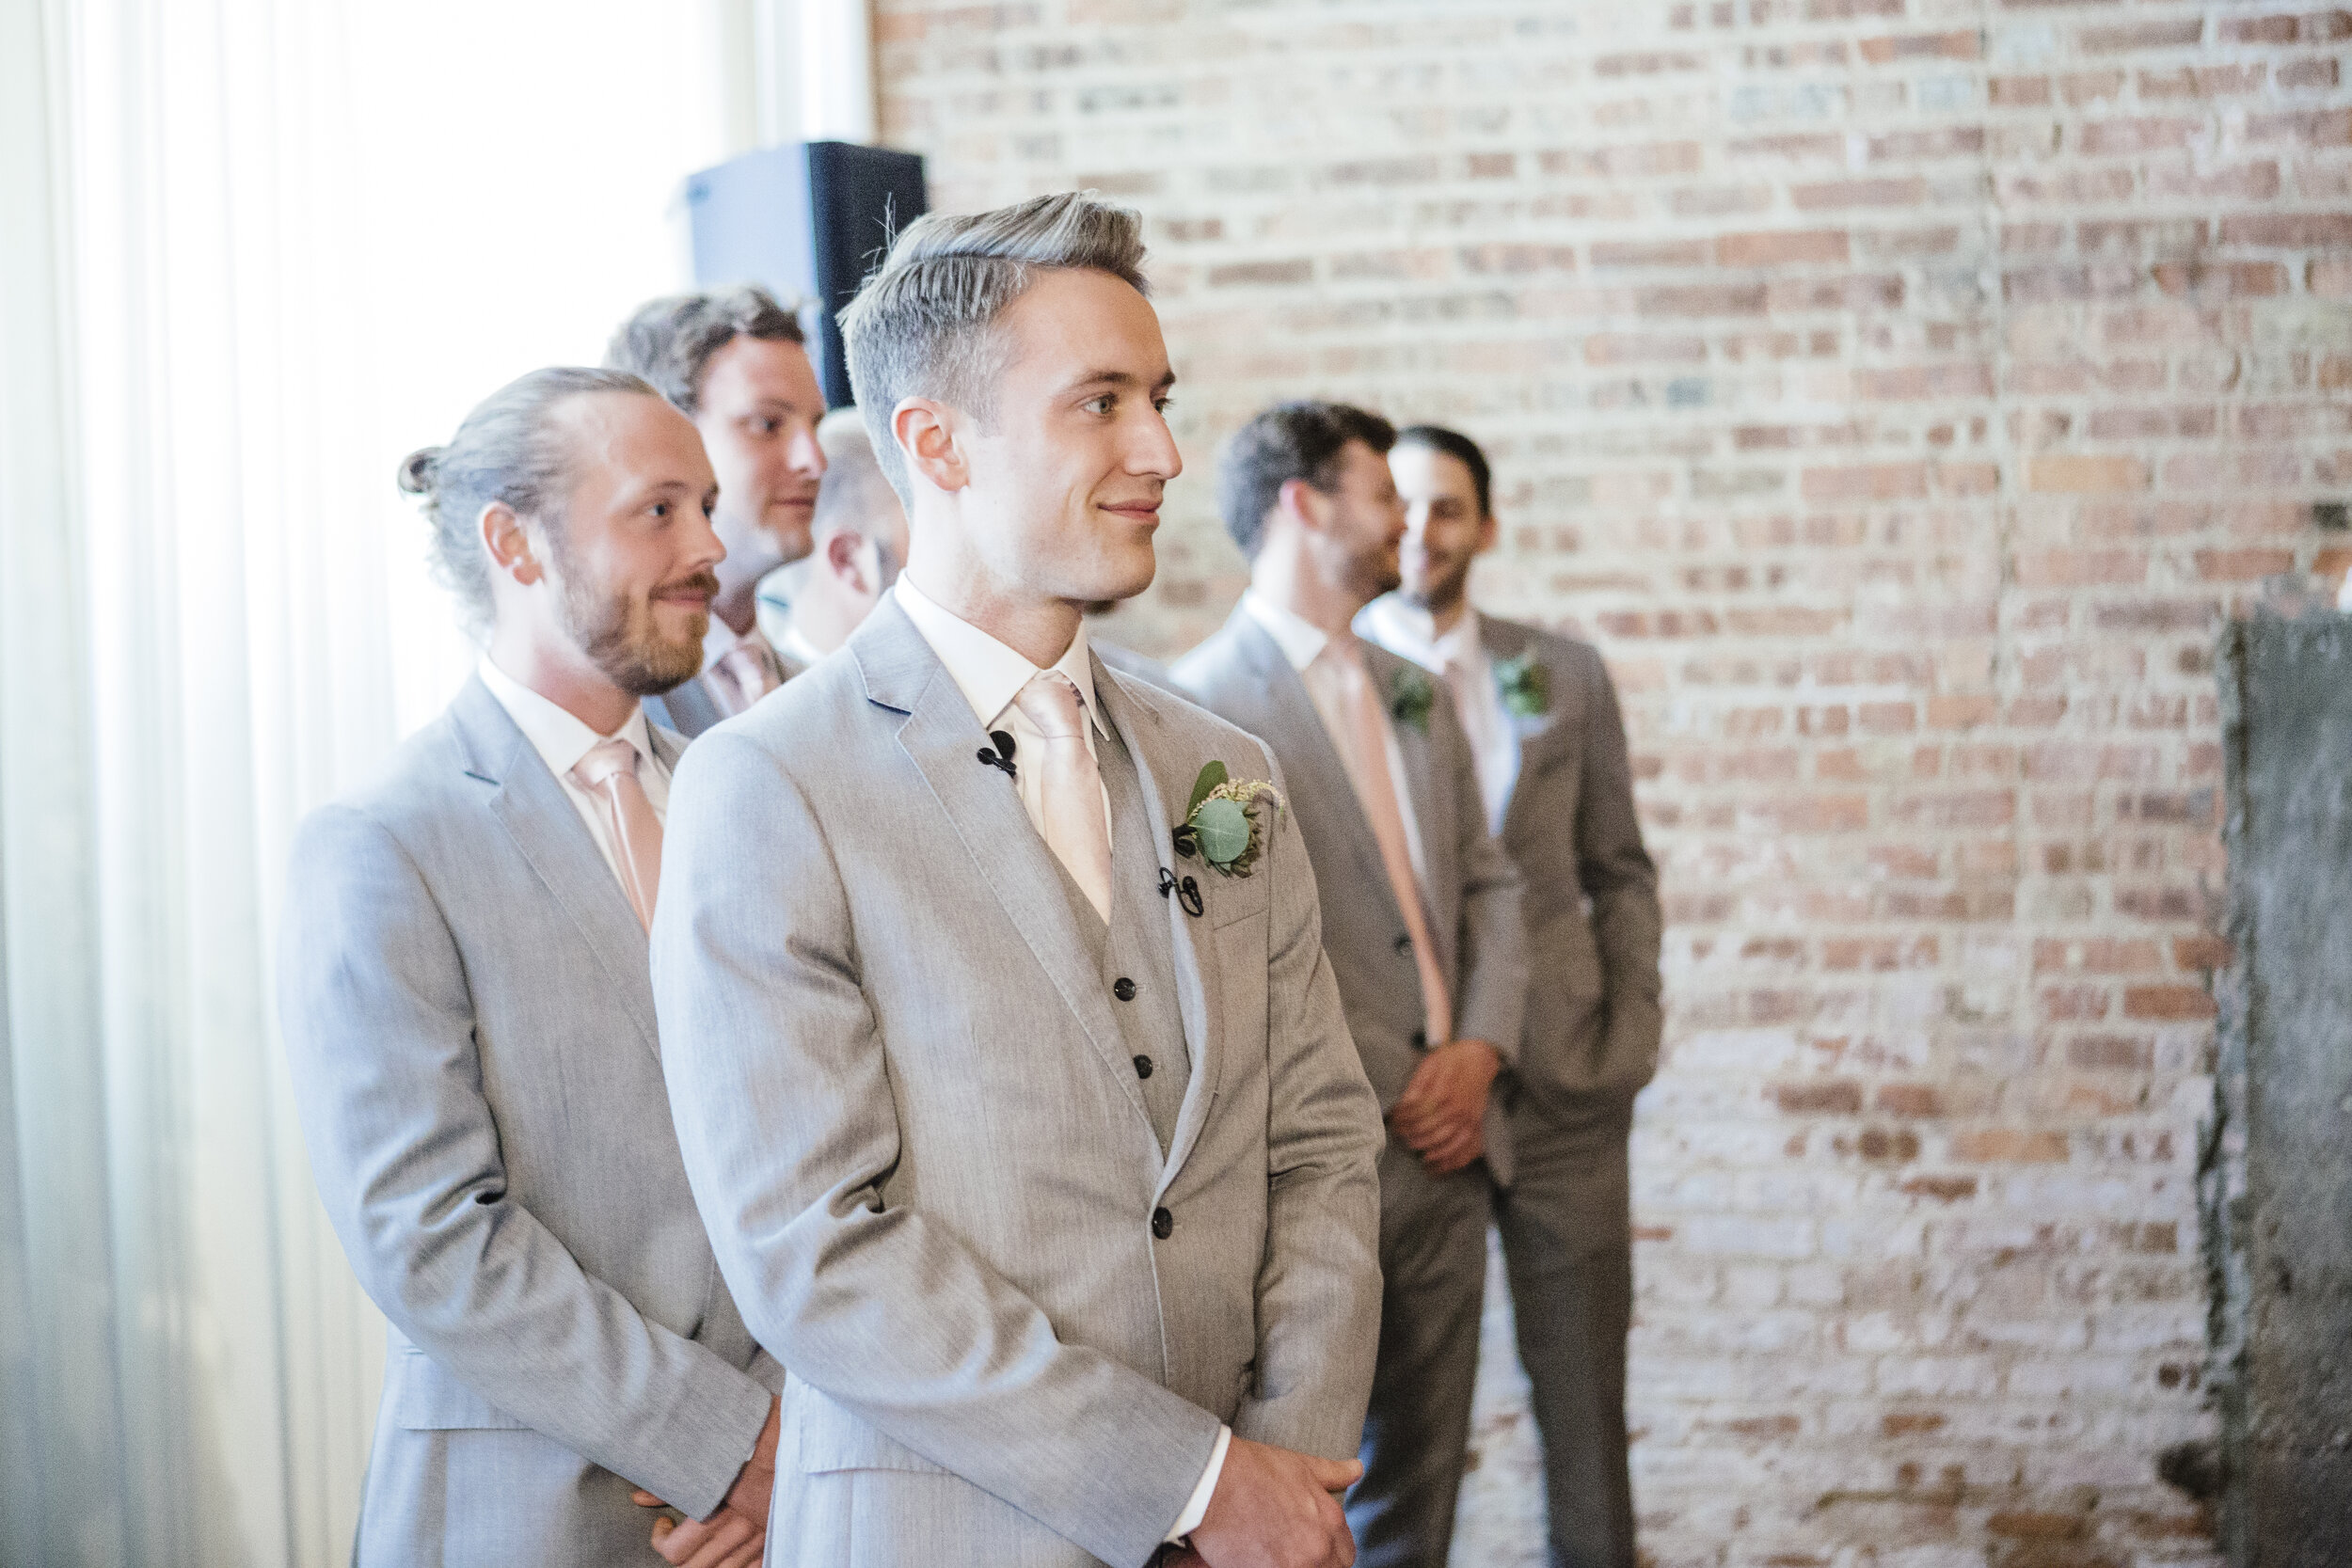 Colorful Chicago loft wedding captured by I Luv Photo. See more loft wedding ideas featured on CHItheeWED.com!